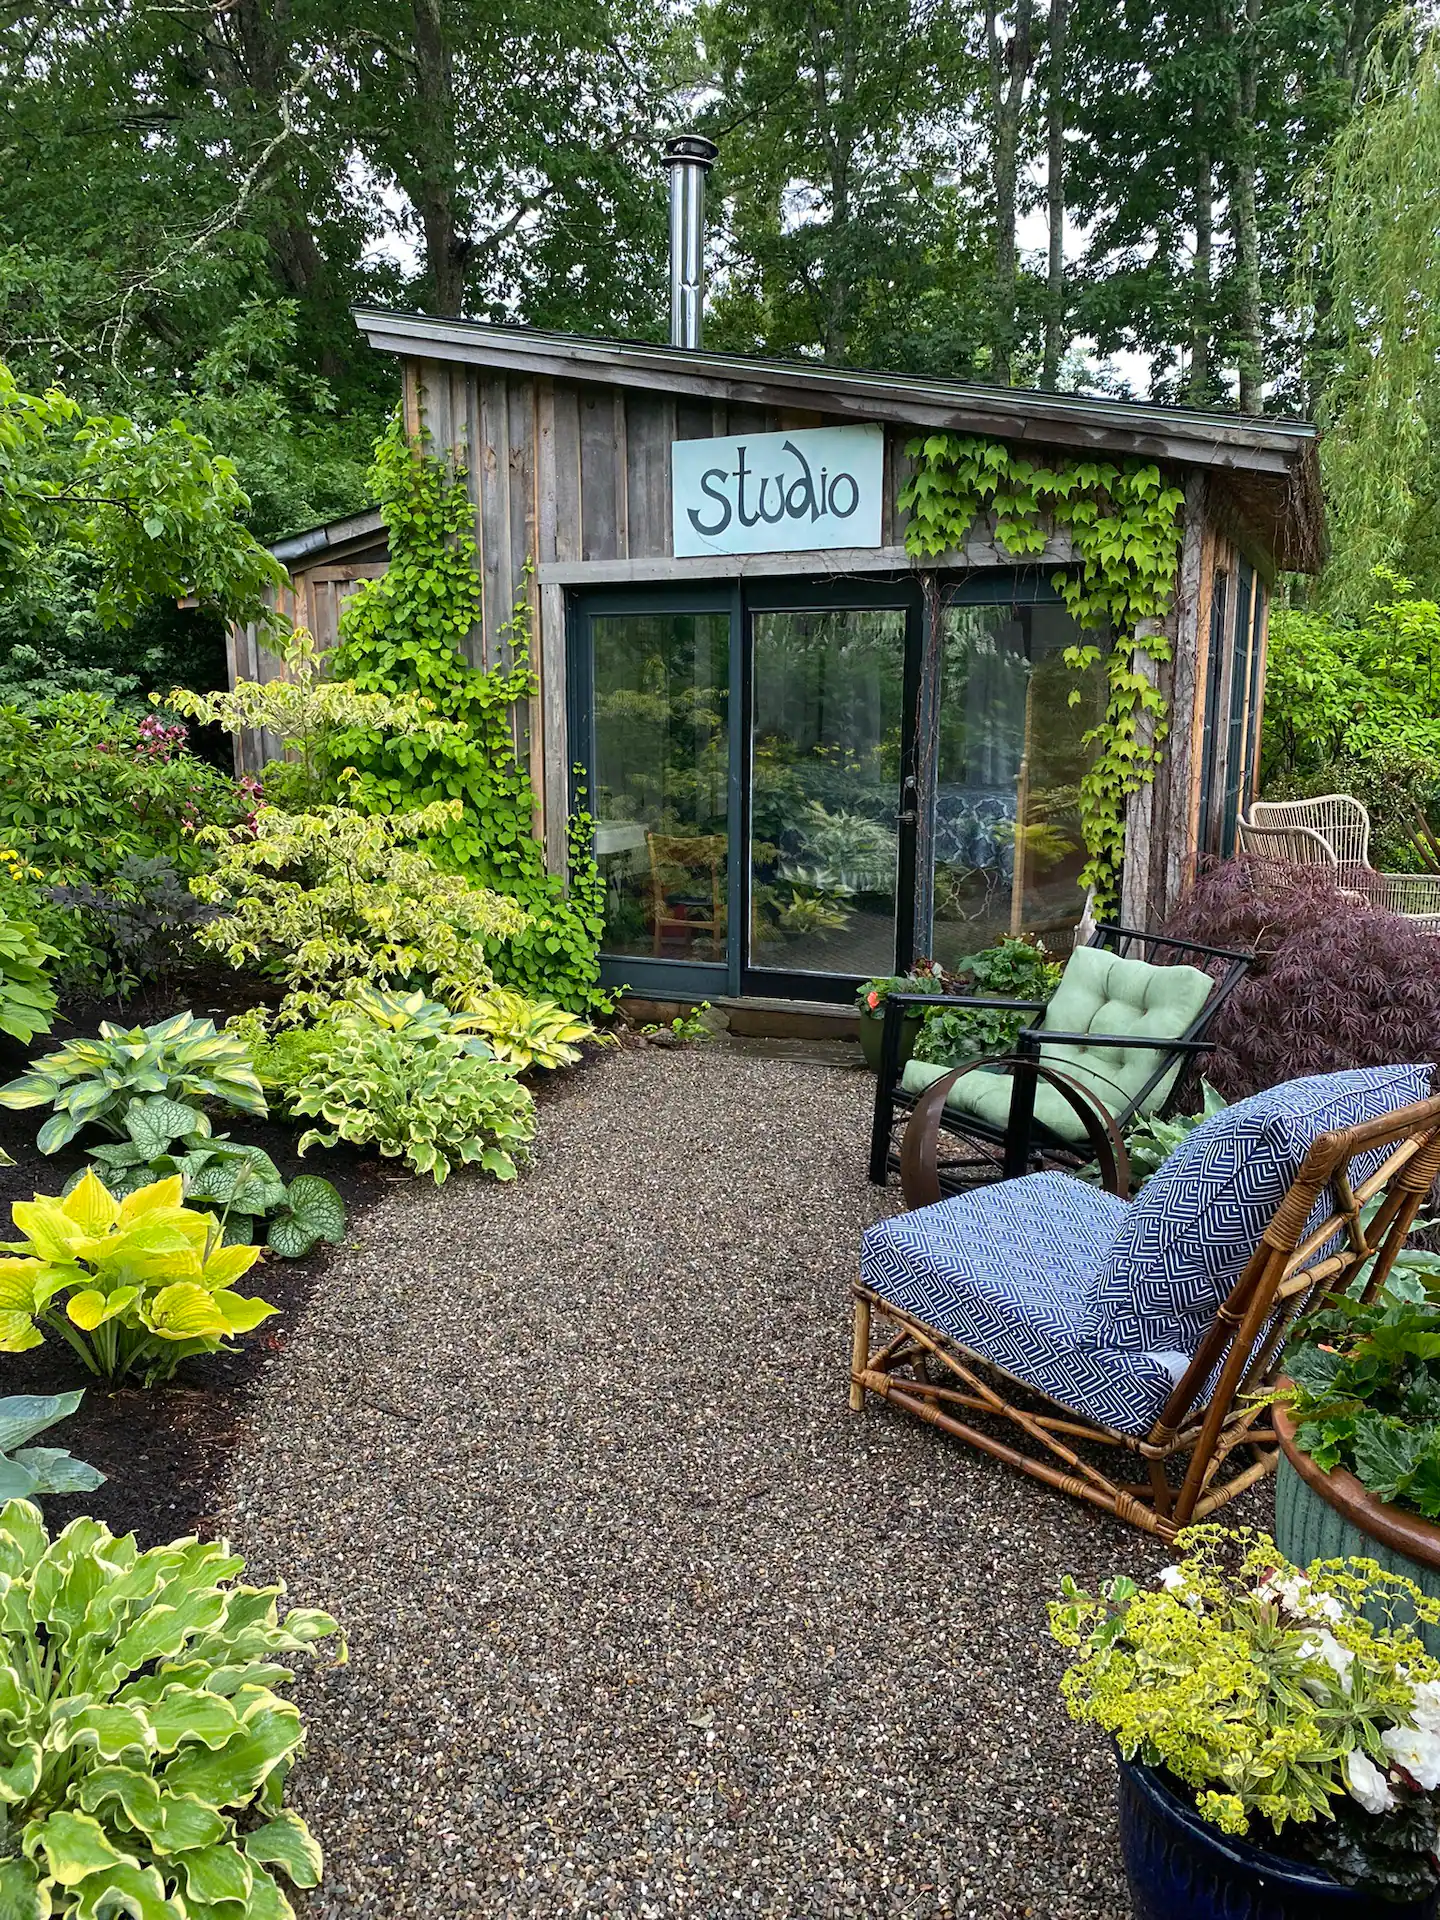 Tiny garden house, one of the best Airbnbs in Maine